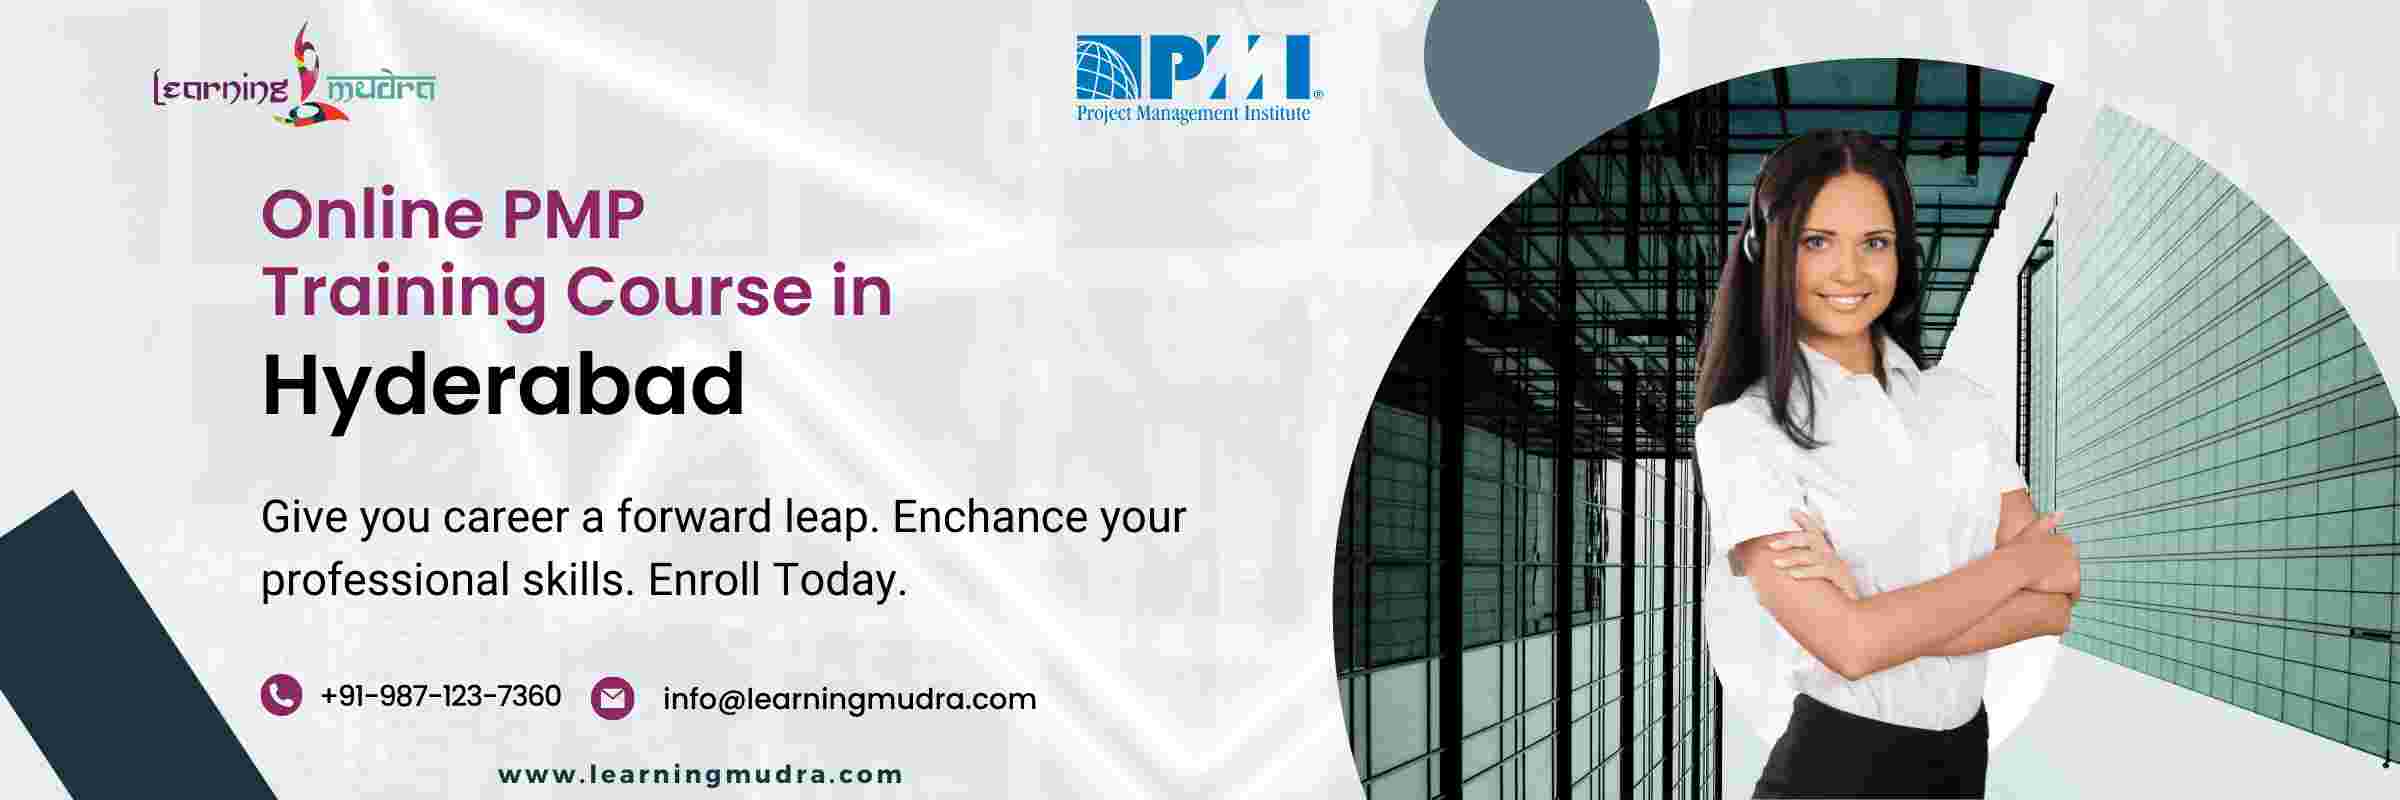 online pmp training course in hyderabad